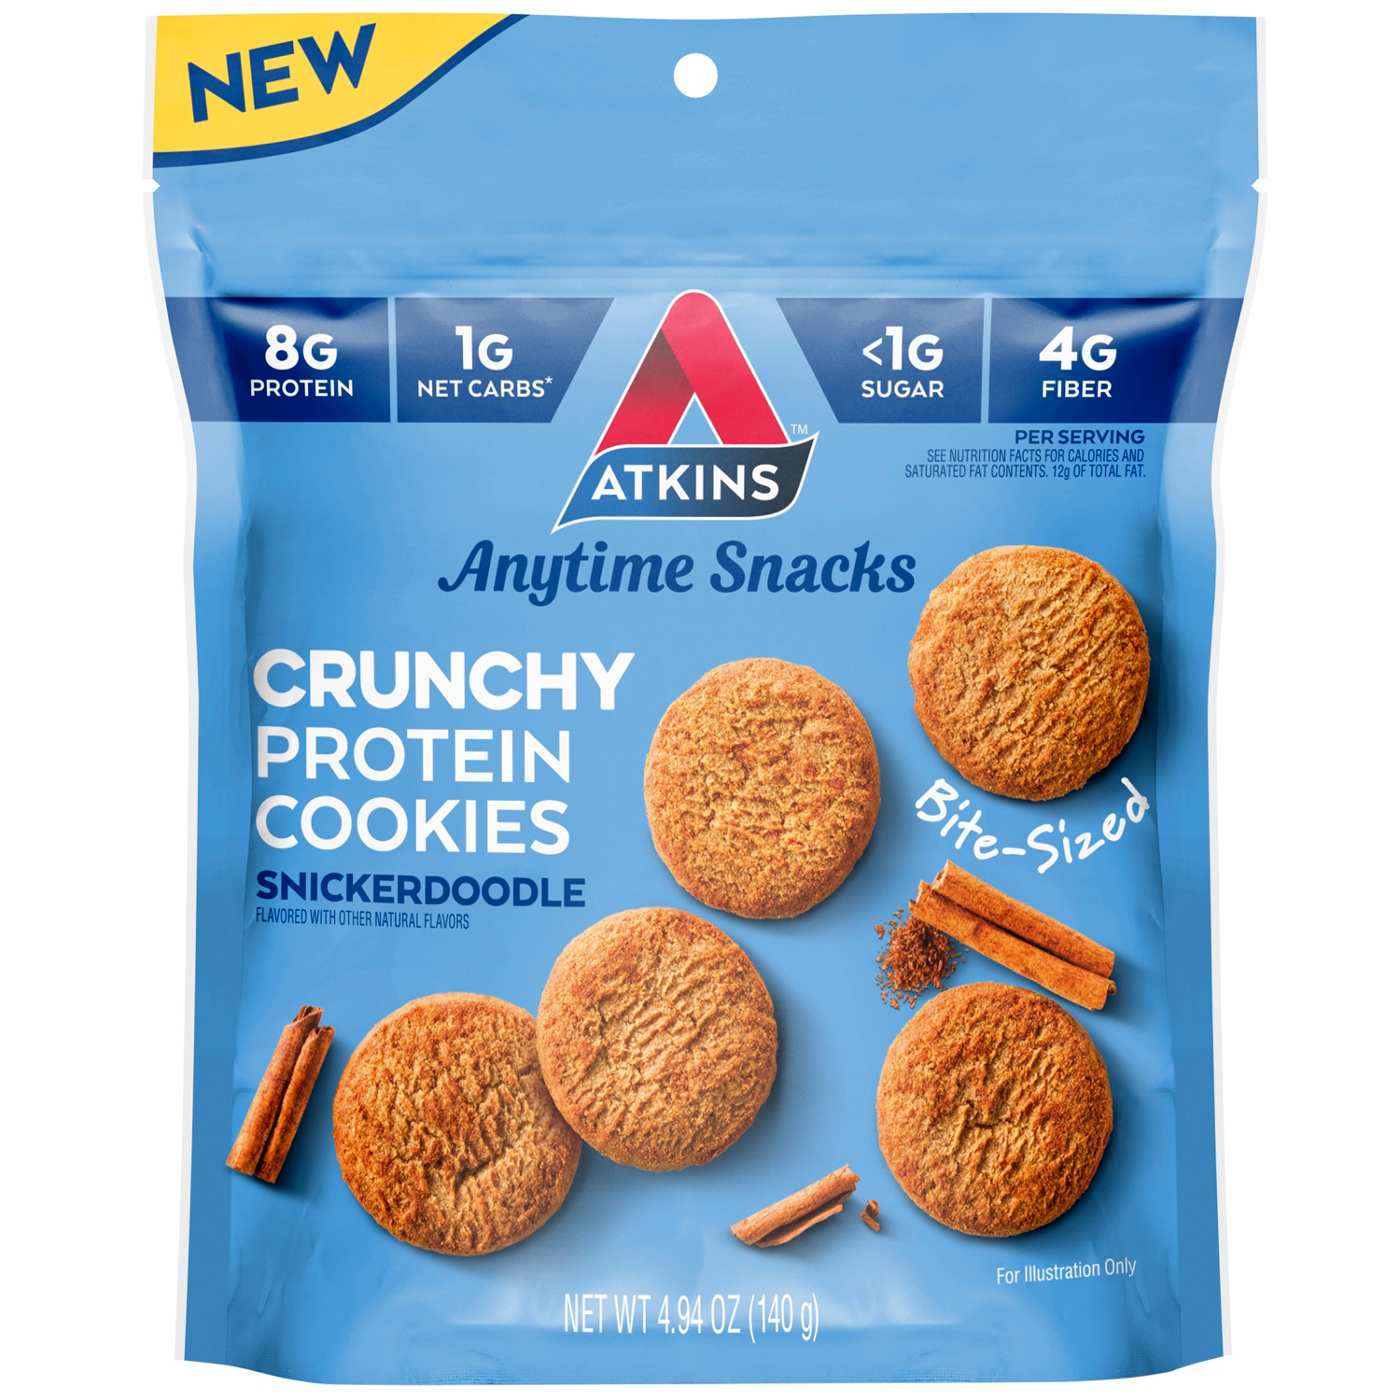 Atkins Crunchy Protein Cookies 8g - Snickerdoodle; image 1 of 2